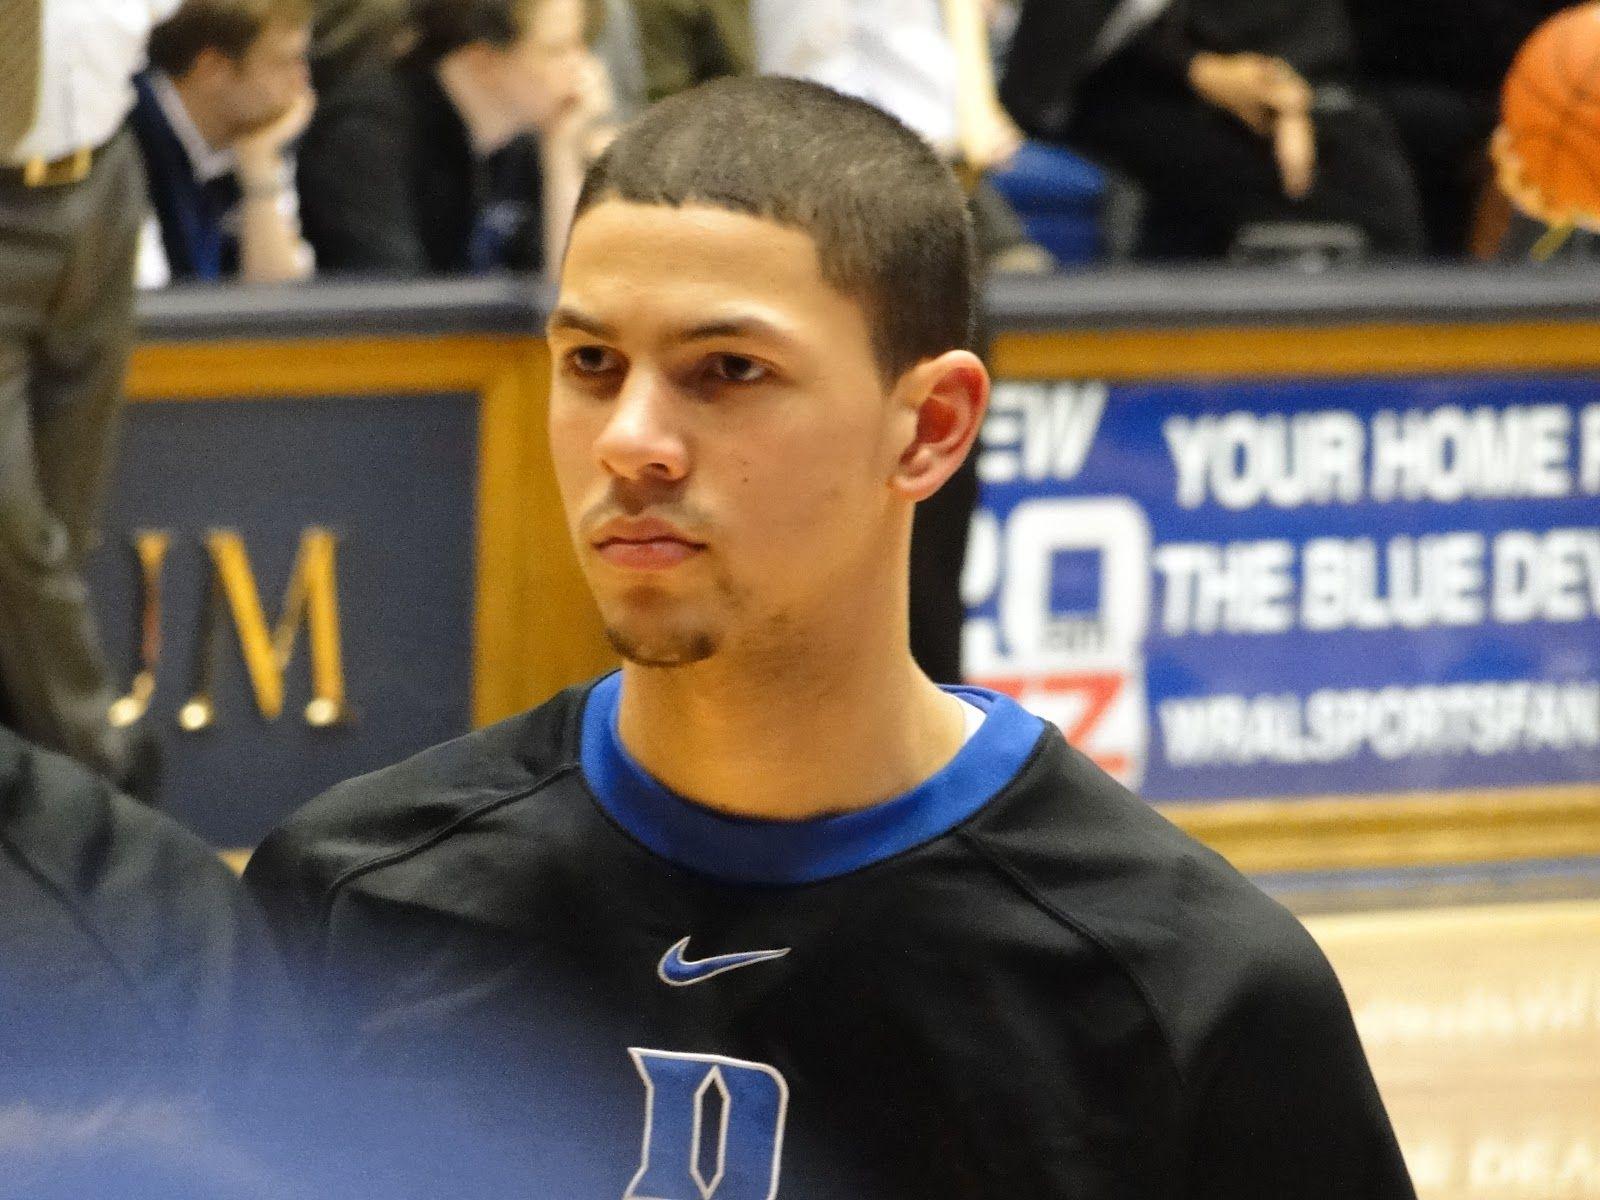 All About Sports: Austin Rivers Profile And Nice Image Gallery